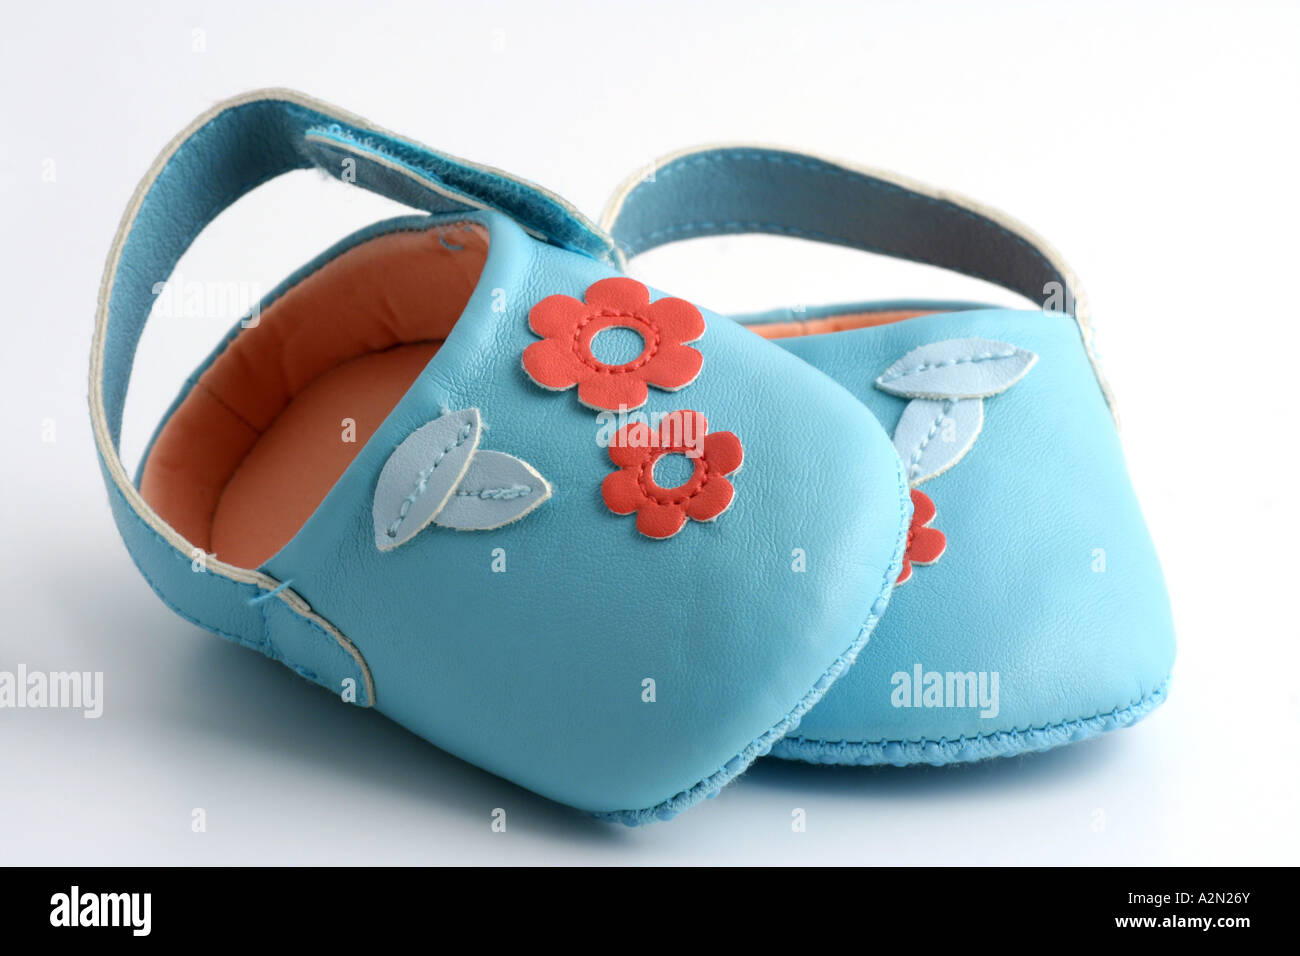 Pair of baby girls turquoise leather shoes. Stock Photo